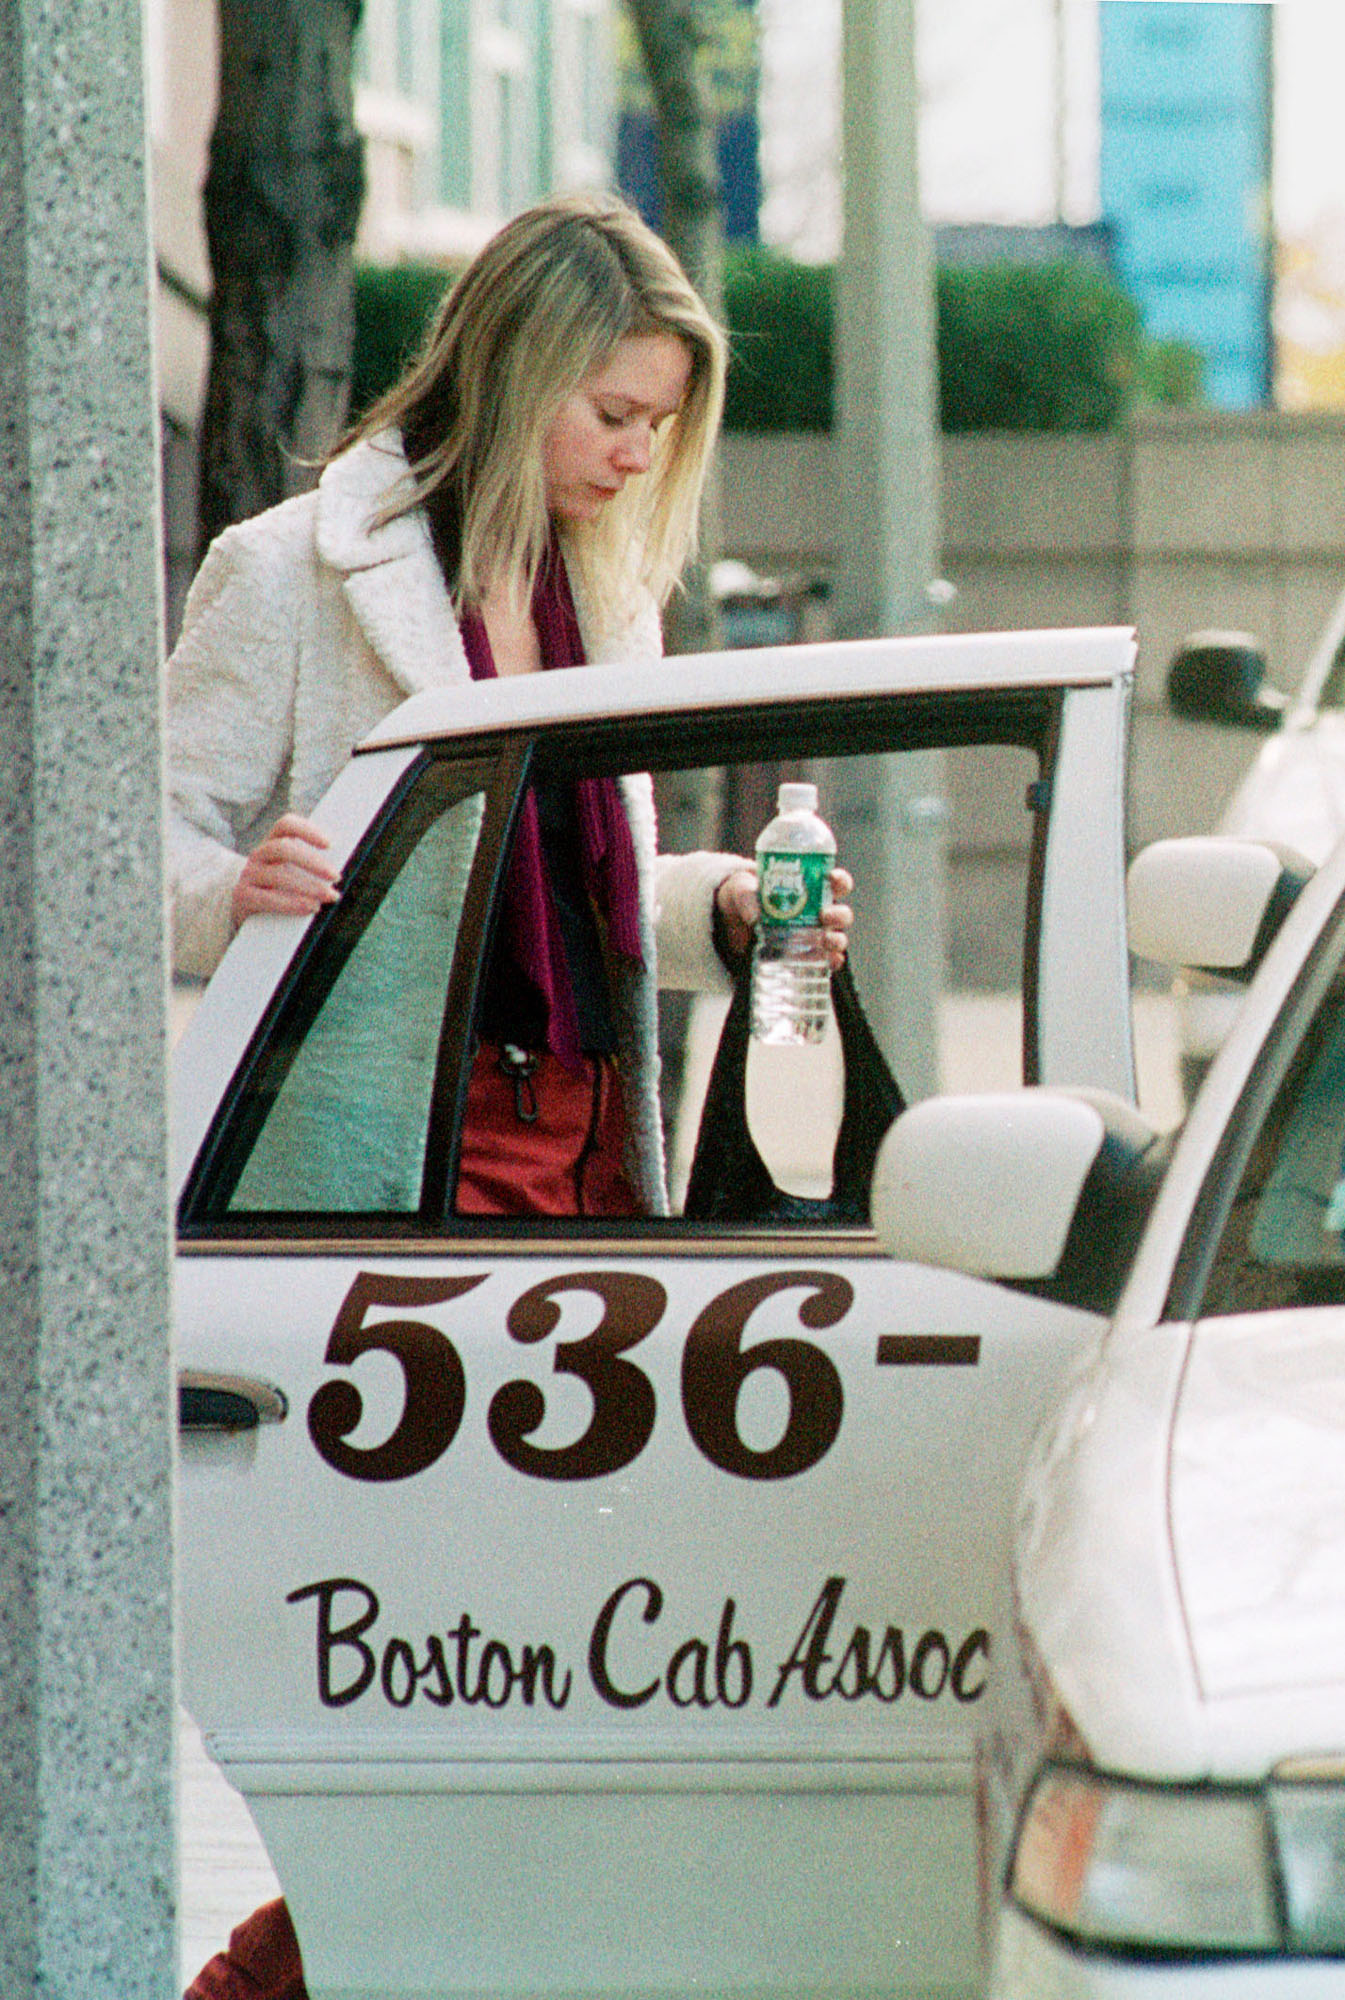 Lee Starkey gets into a cab in Boston after leaving Brigham and Women's Hospital on November 28, 2001 | Source: Getty Images